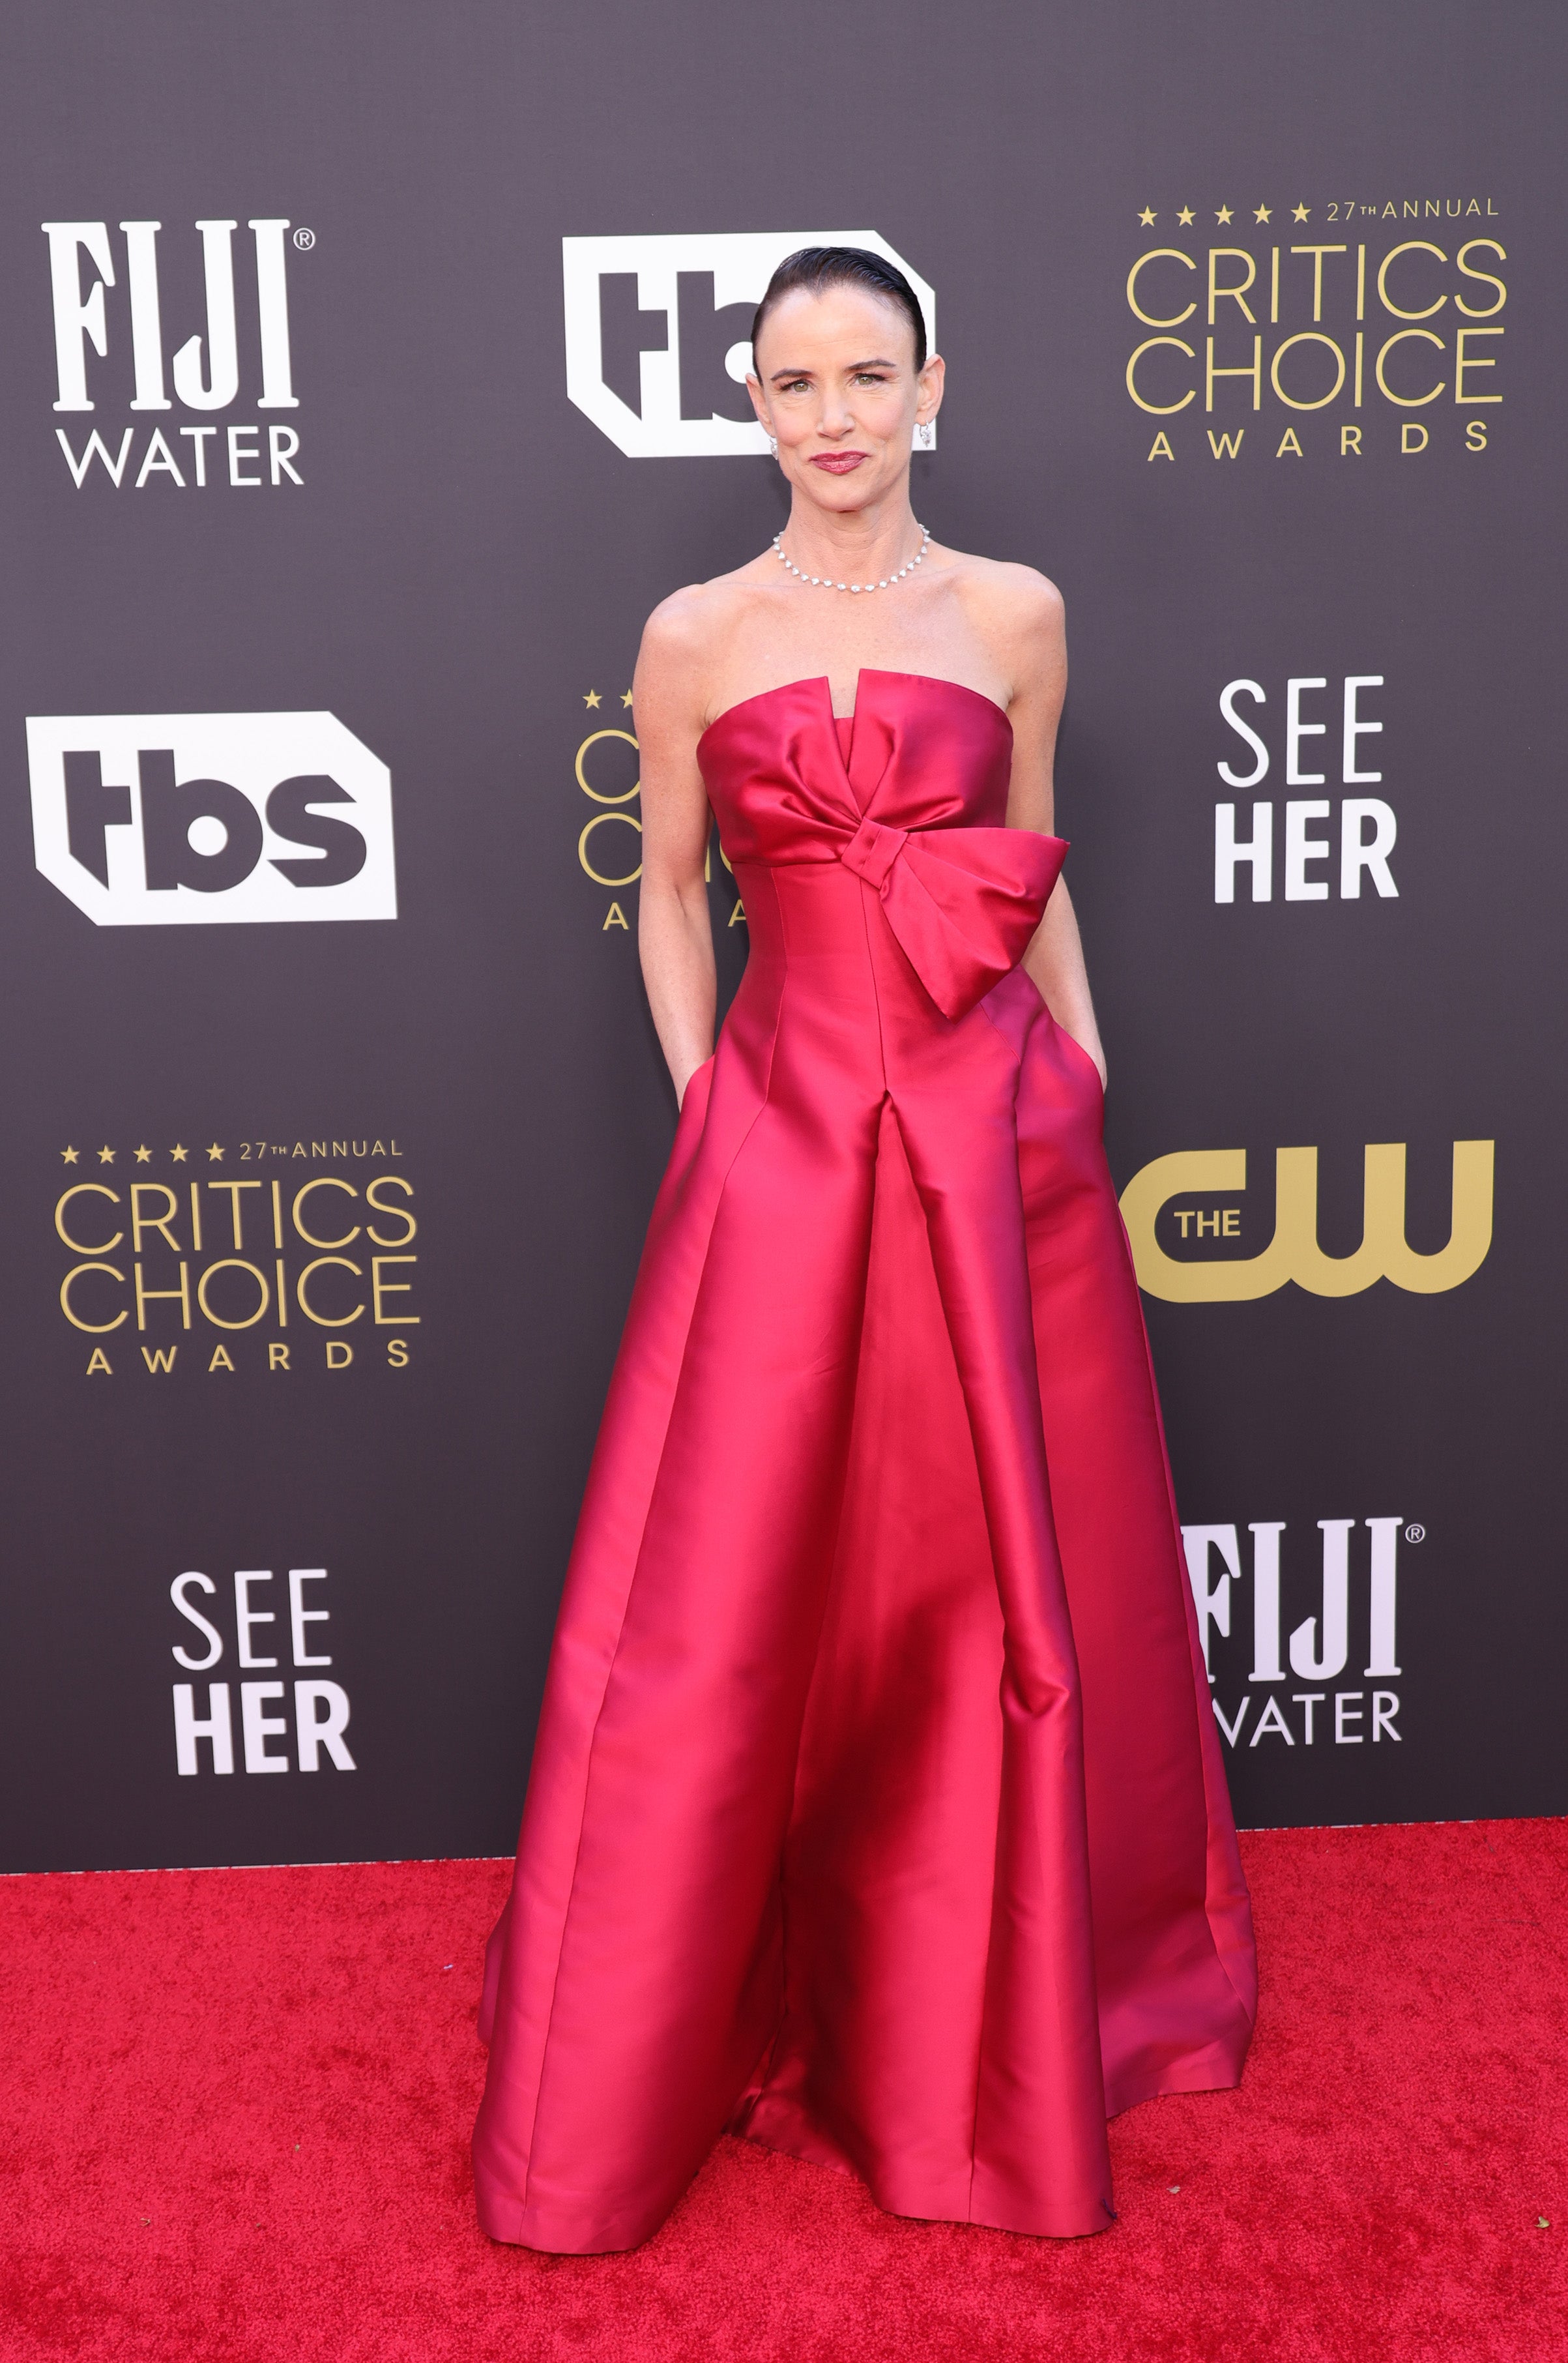 Juliette Lewis in a dramatic red gown